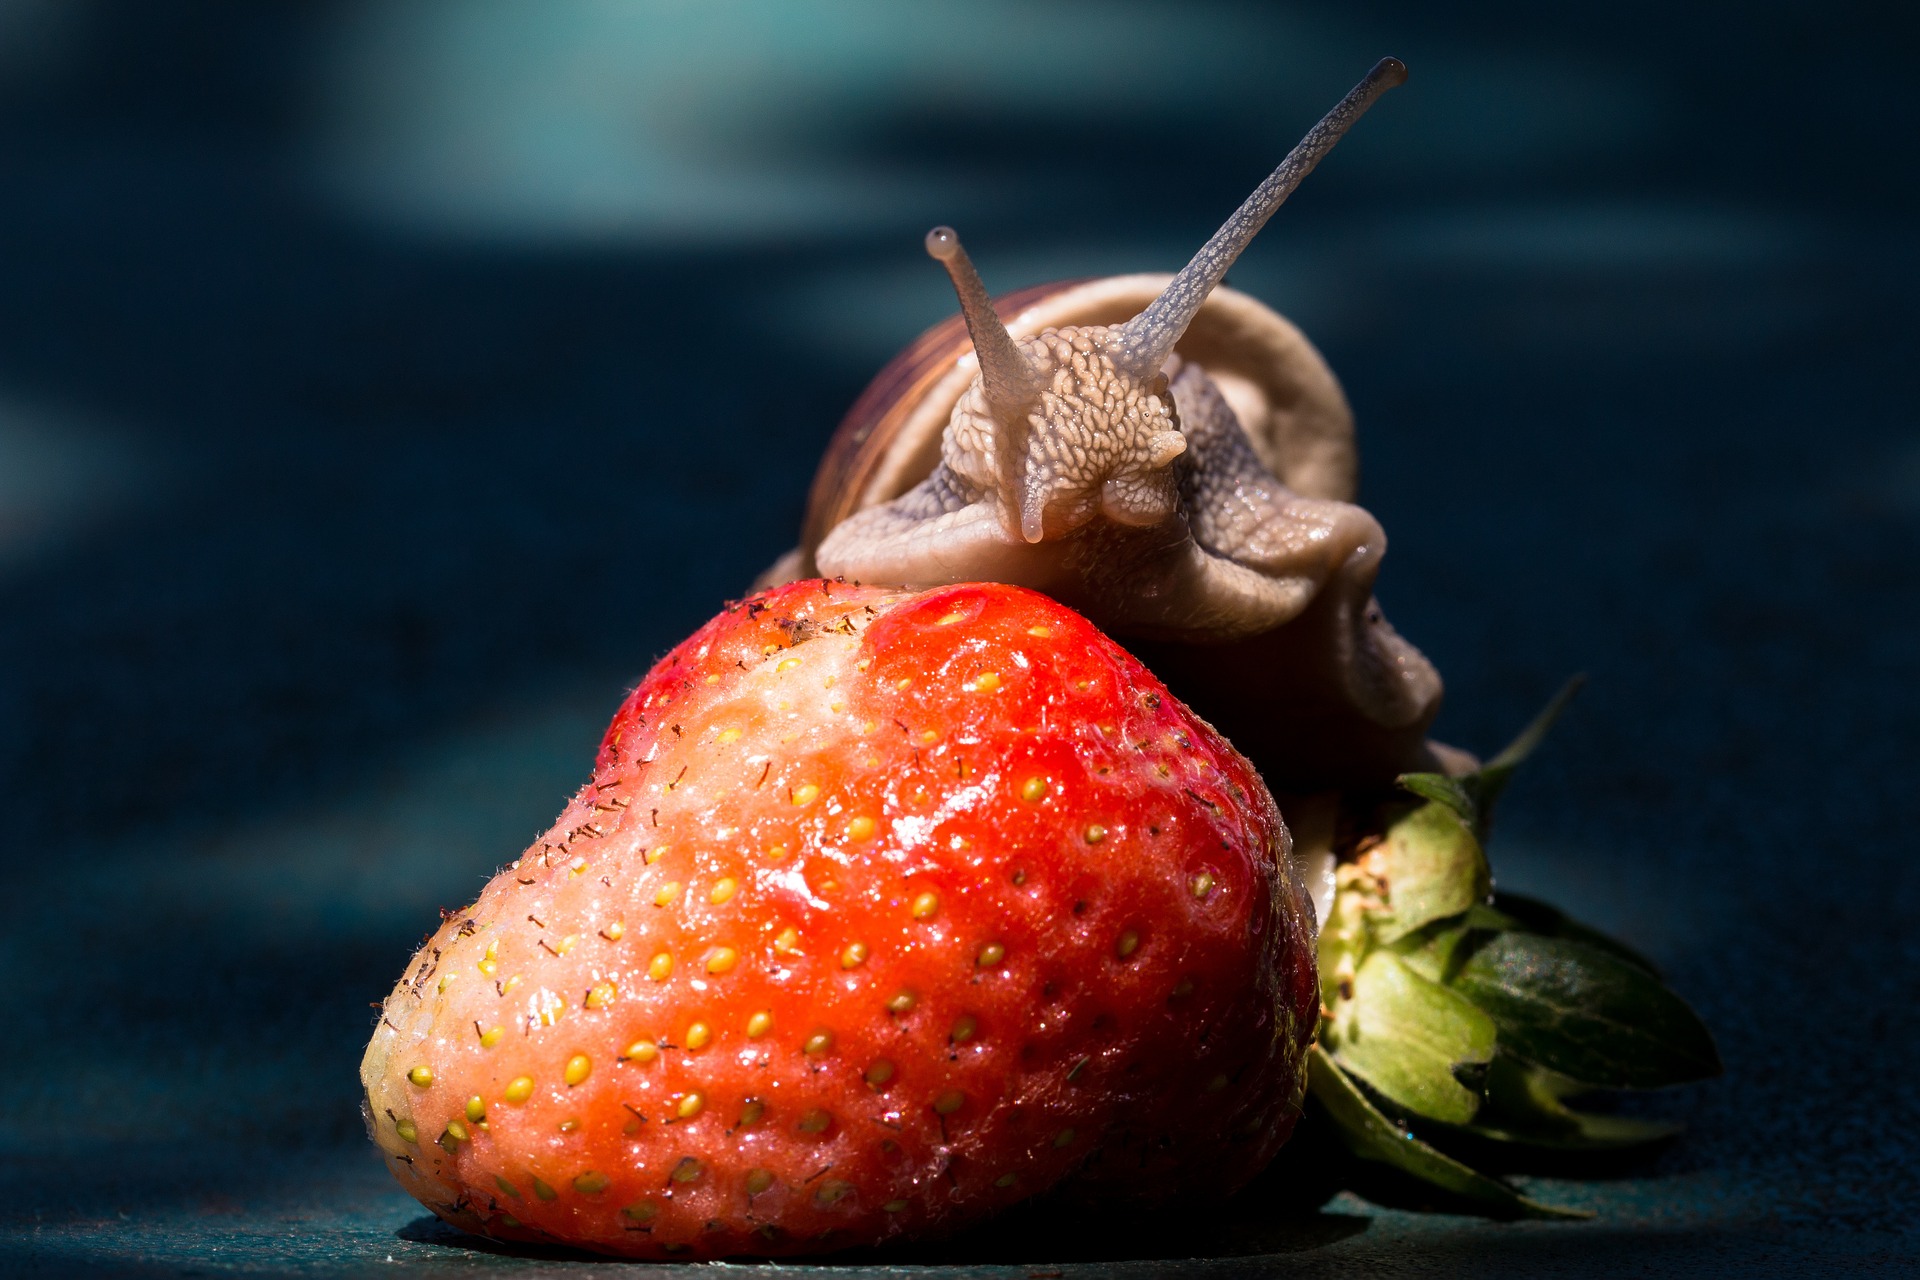 Snail on the strawberry photo